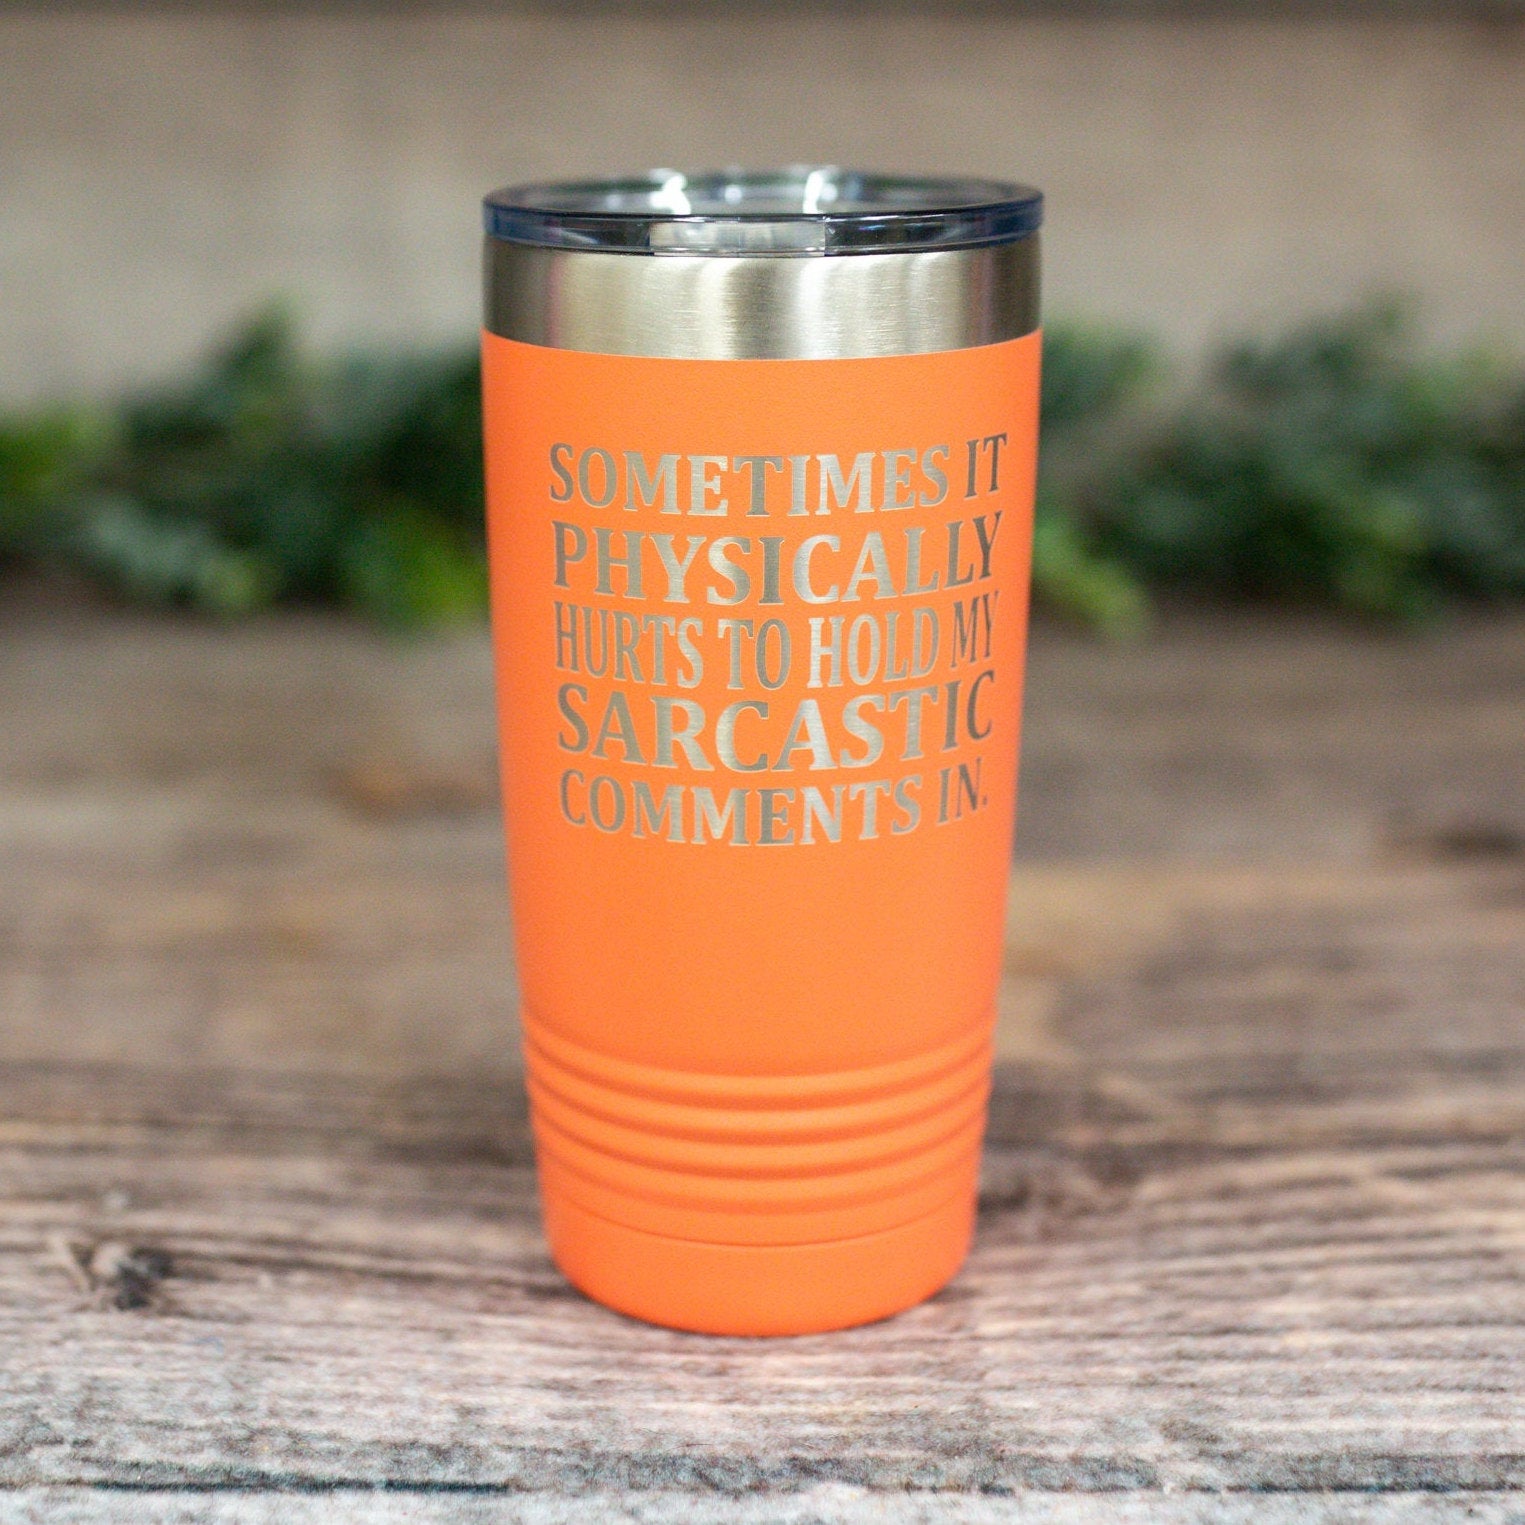 My Level Of Sarcasm Depends On Your Level Of Stupidity - Engraved Funny  Tumbler, Funny Gift For Her, Sarcastic Mug, Best Friend Sarcasm Gift